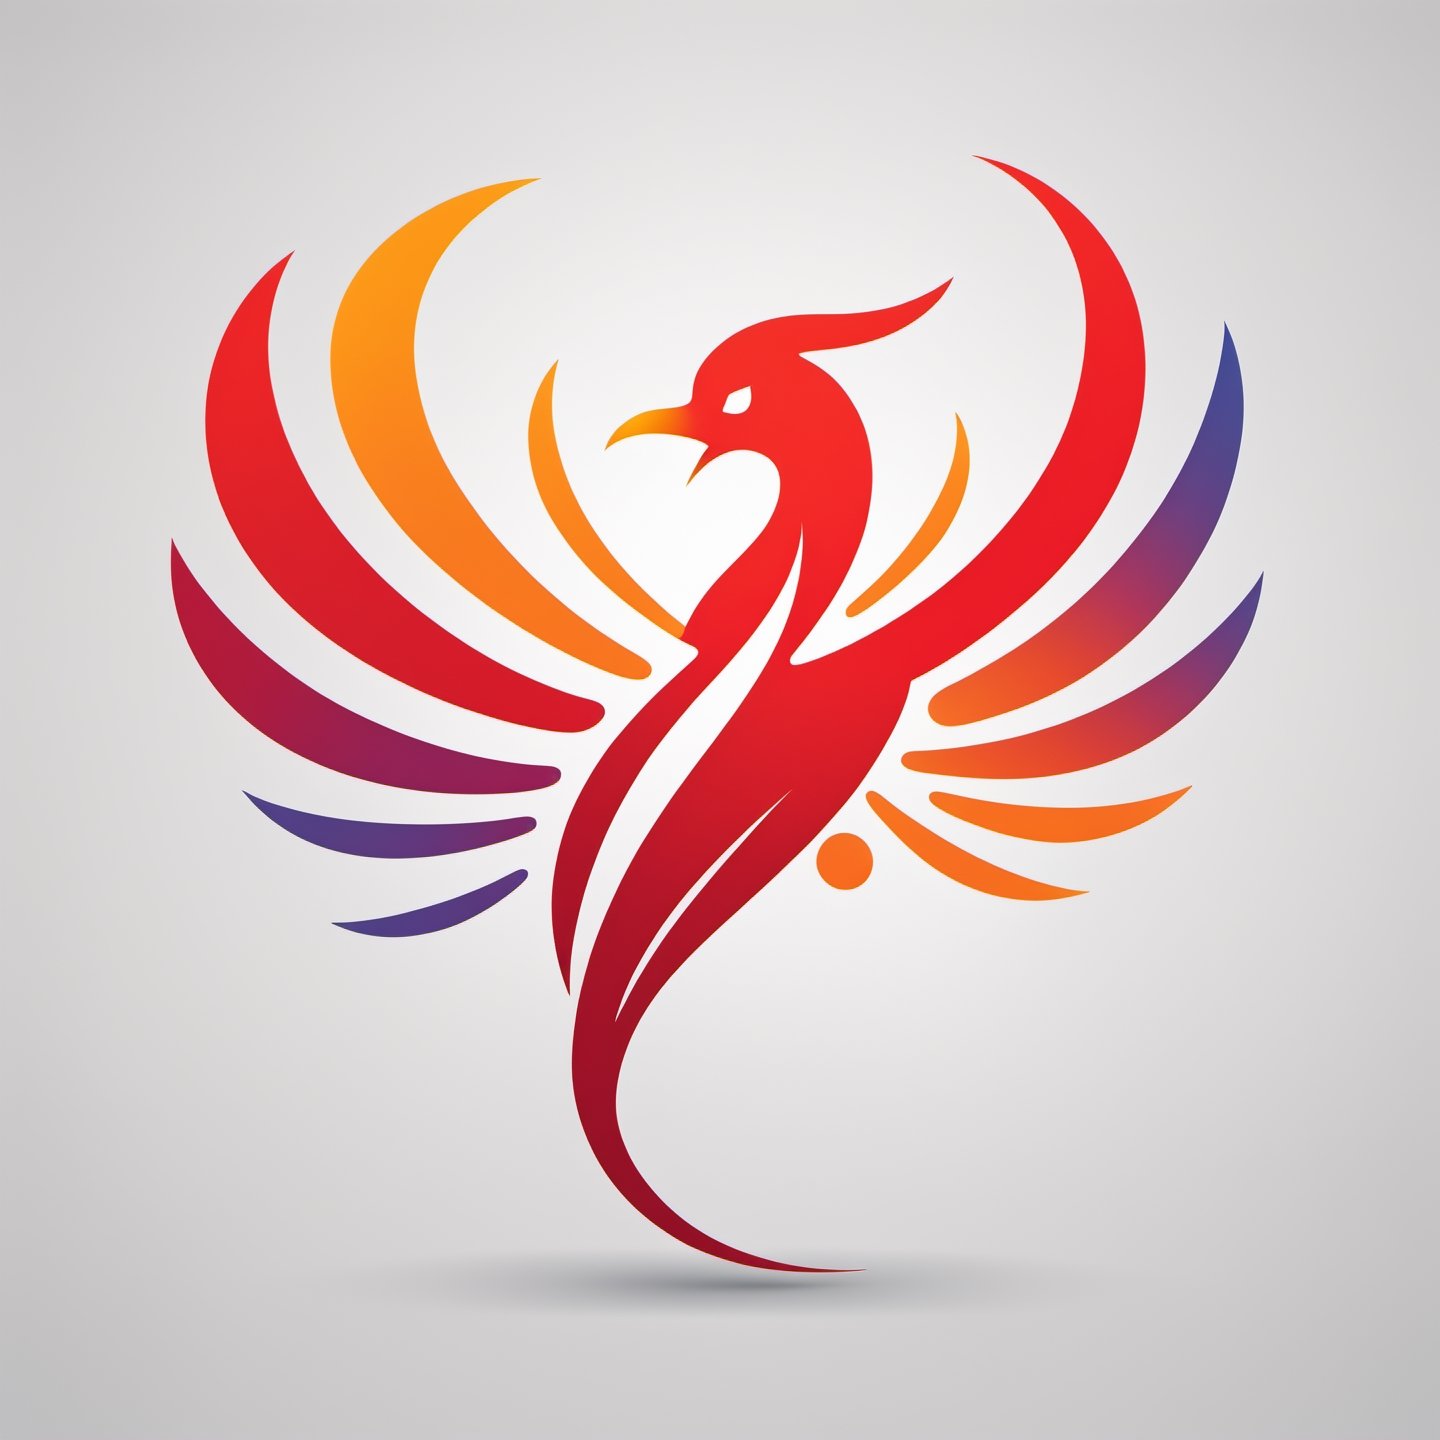 ((vector illustration, flat design)), (((logo phoenix with open wing, flying from fire, facing left:1.4))), ((letter "SIS":1.3)) simple design elements, (((red:1.5), orange palette:1.4)), white background, high quality, ultra-detailed, professional, modern style, eye-catching emblem, creative composition, sharp lines and shapes, stylish and clean, appealing to the eye, striking visual impact, playful and dynamic, crisp and vibrant colors, vivid color scheme, attractive contrast, bold and minimalistic, artistic flair, lively and energetic feel, catchy and memorable design, versatile and scalable graphics, modern and trendy aesthetic, fluid and smooth curves, professional and polished finish, artistic elegance, unique and original concept, vector art illustration